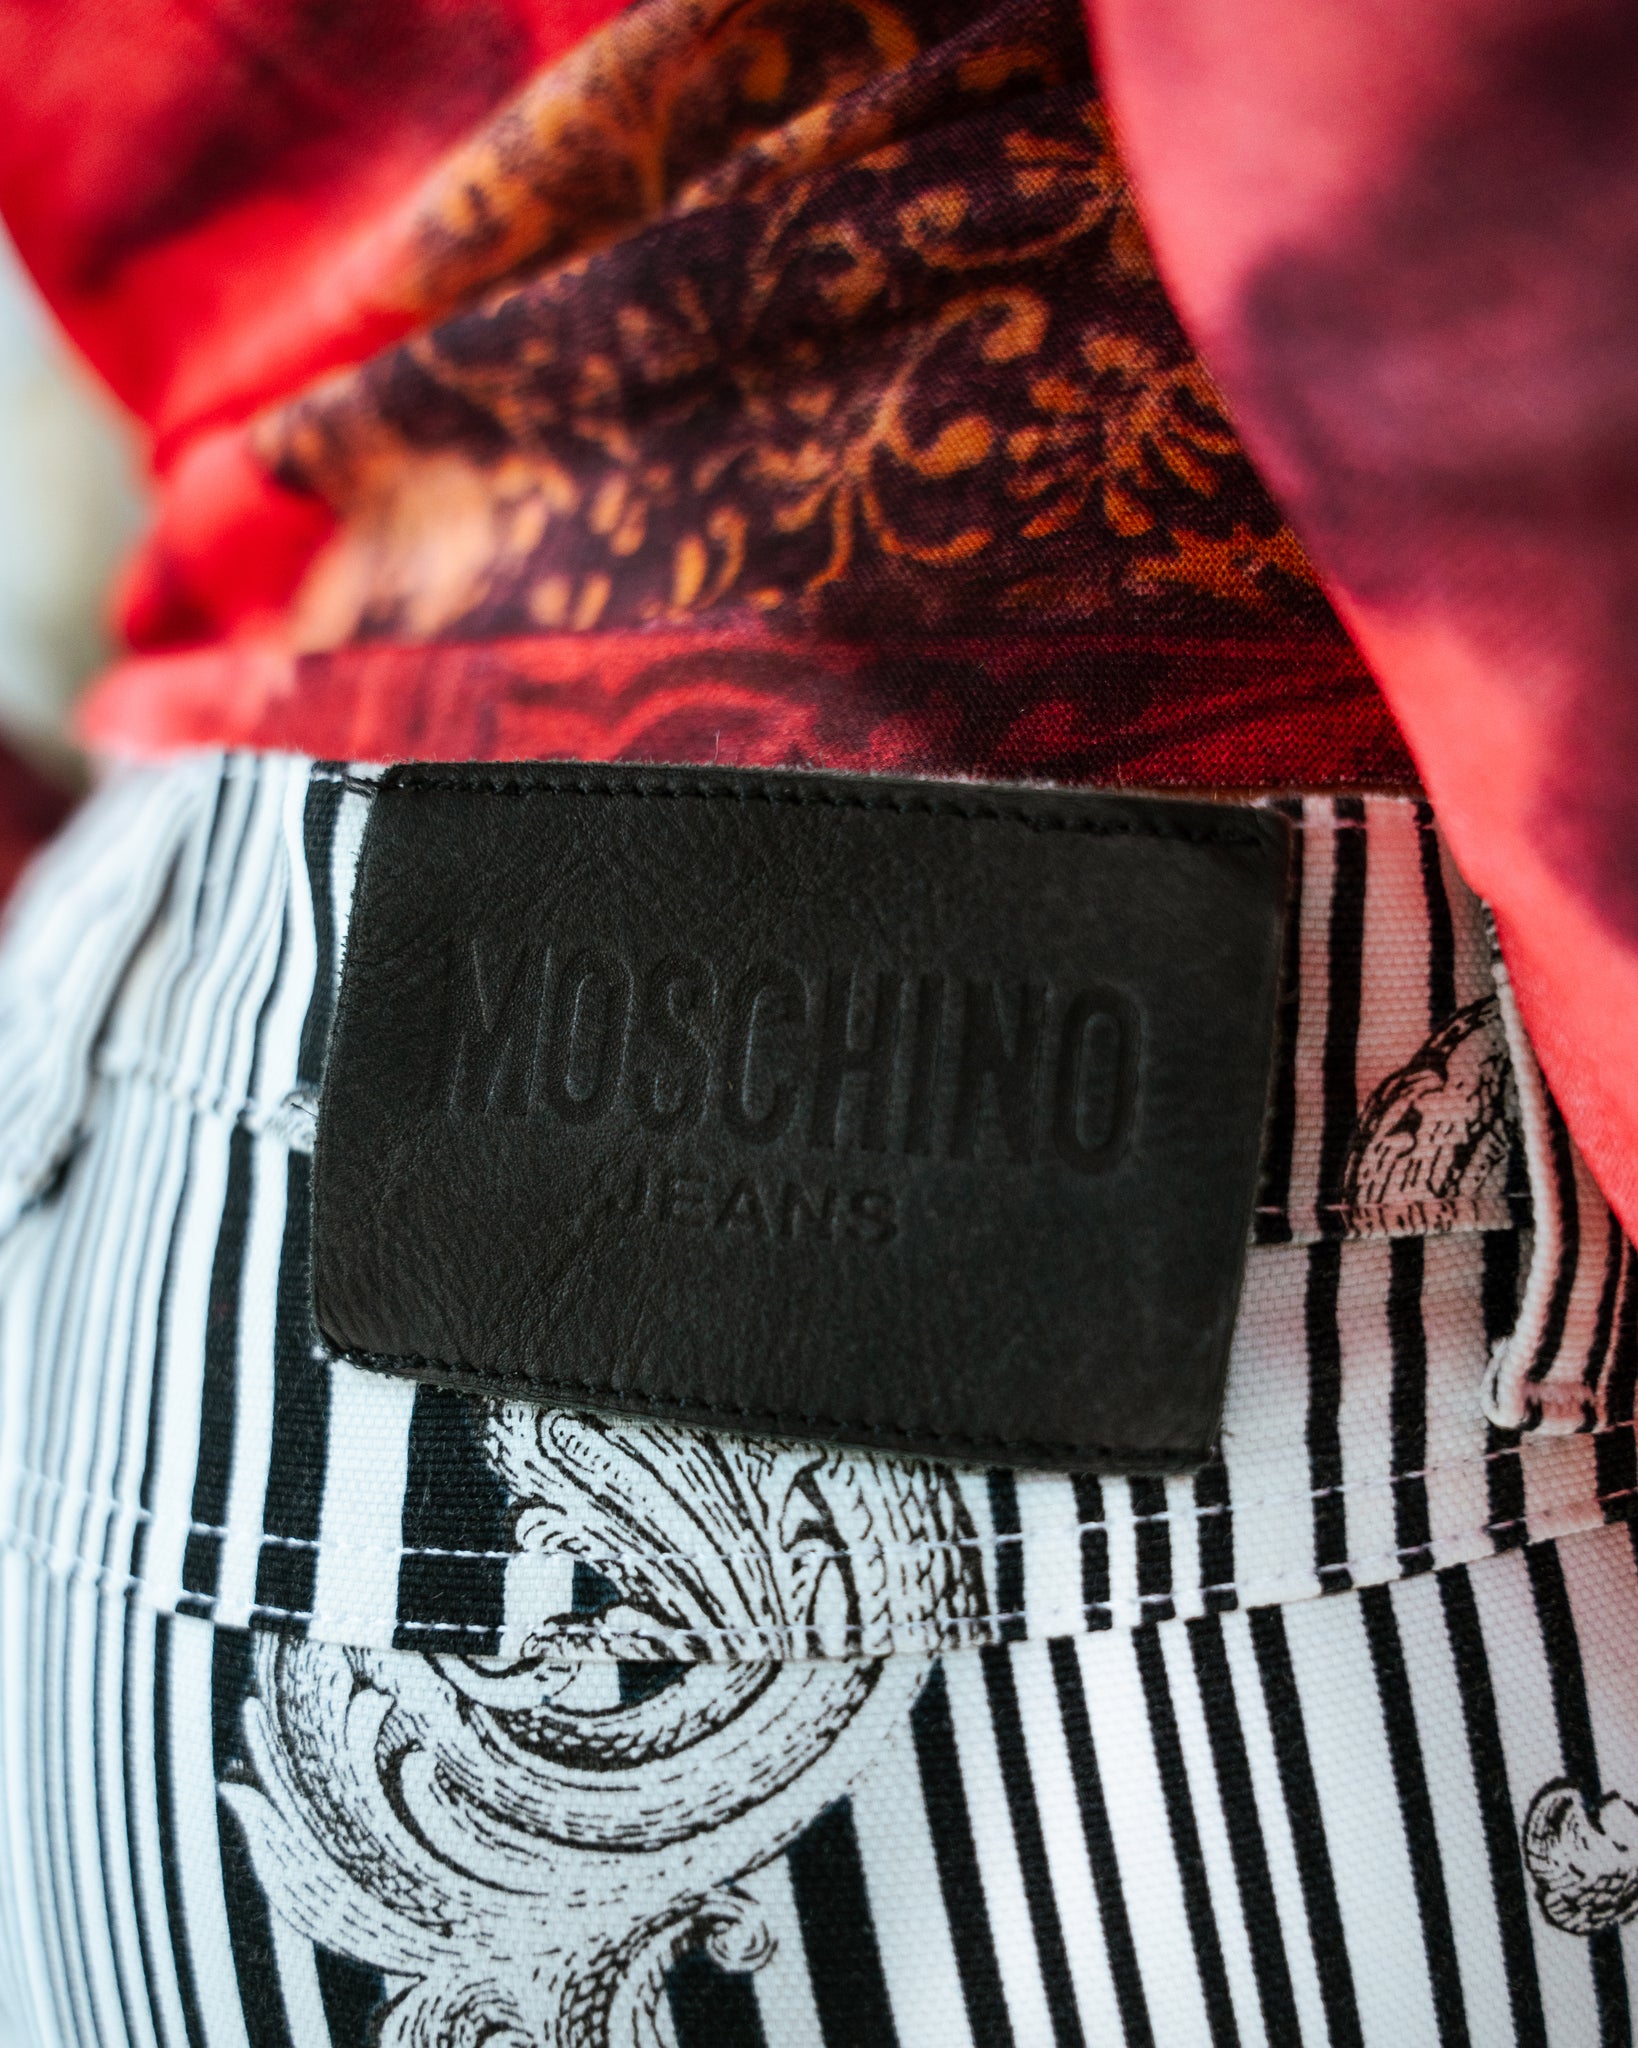 VINTAGE MOSCHINO BLACK AND WHITE PRINTED JEANS